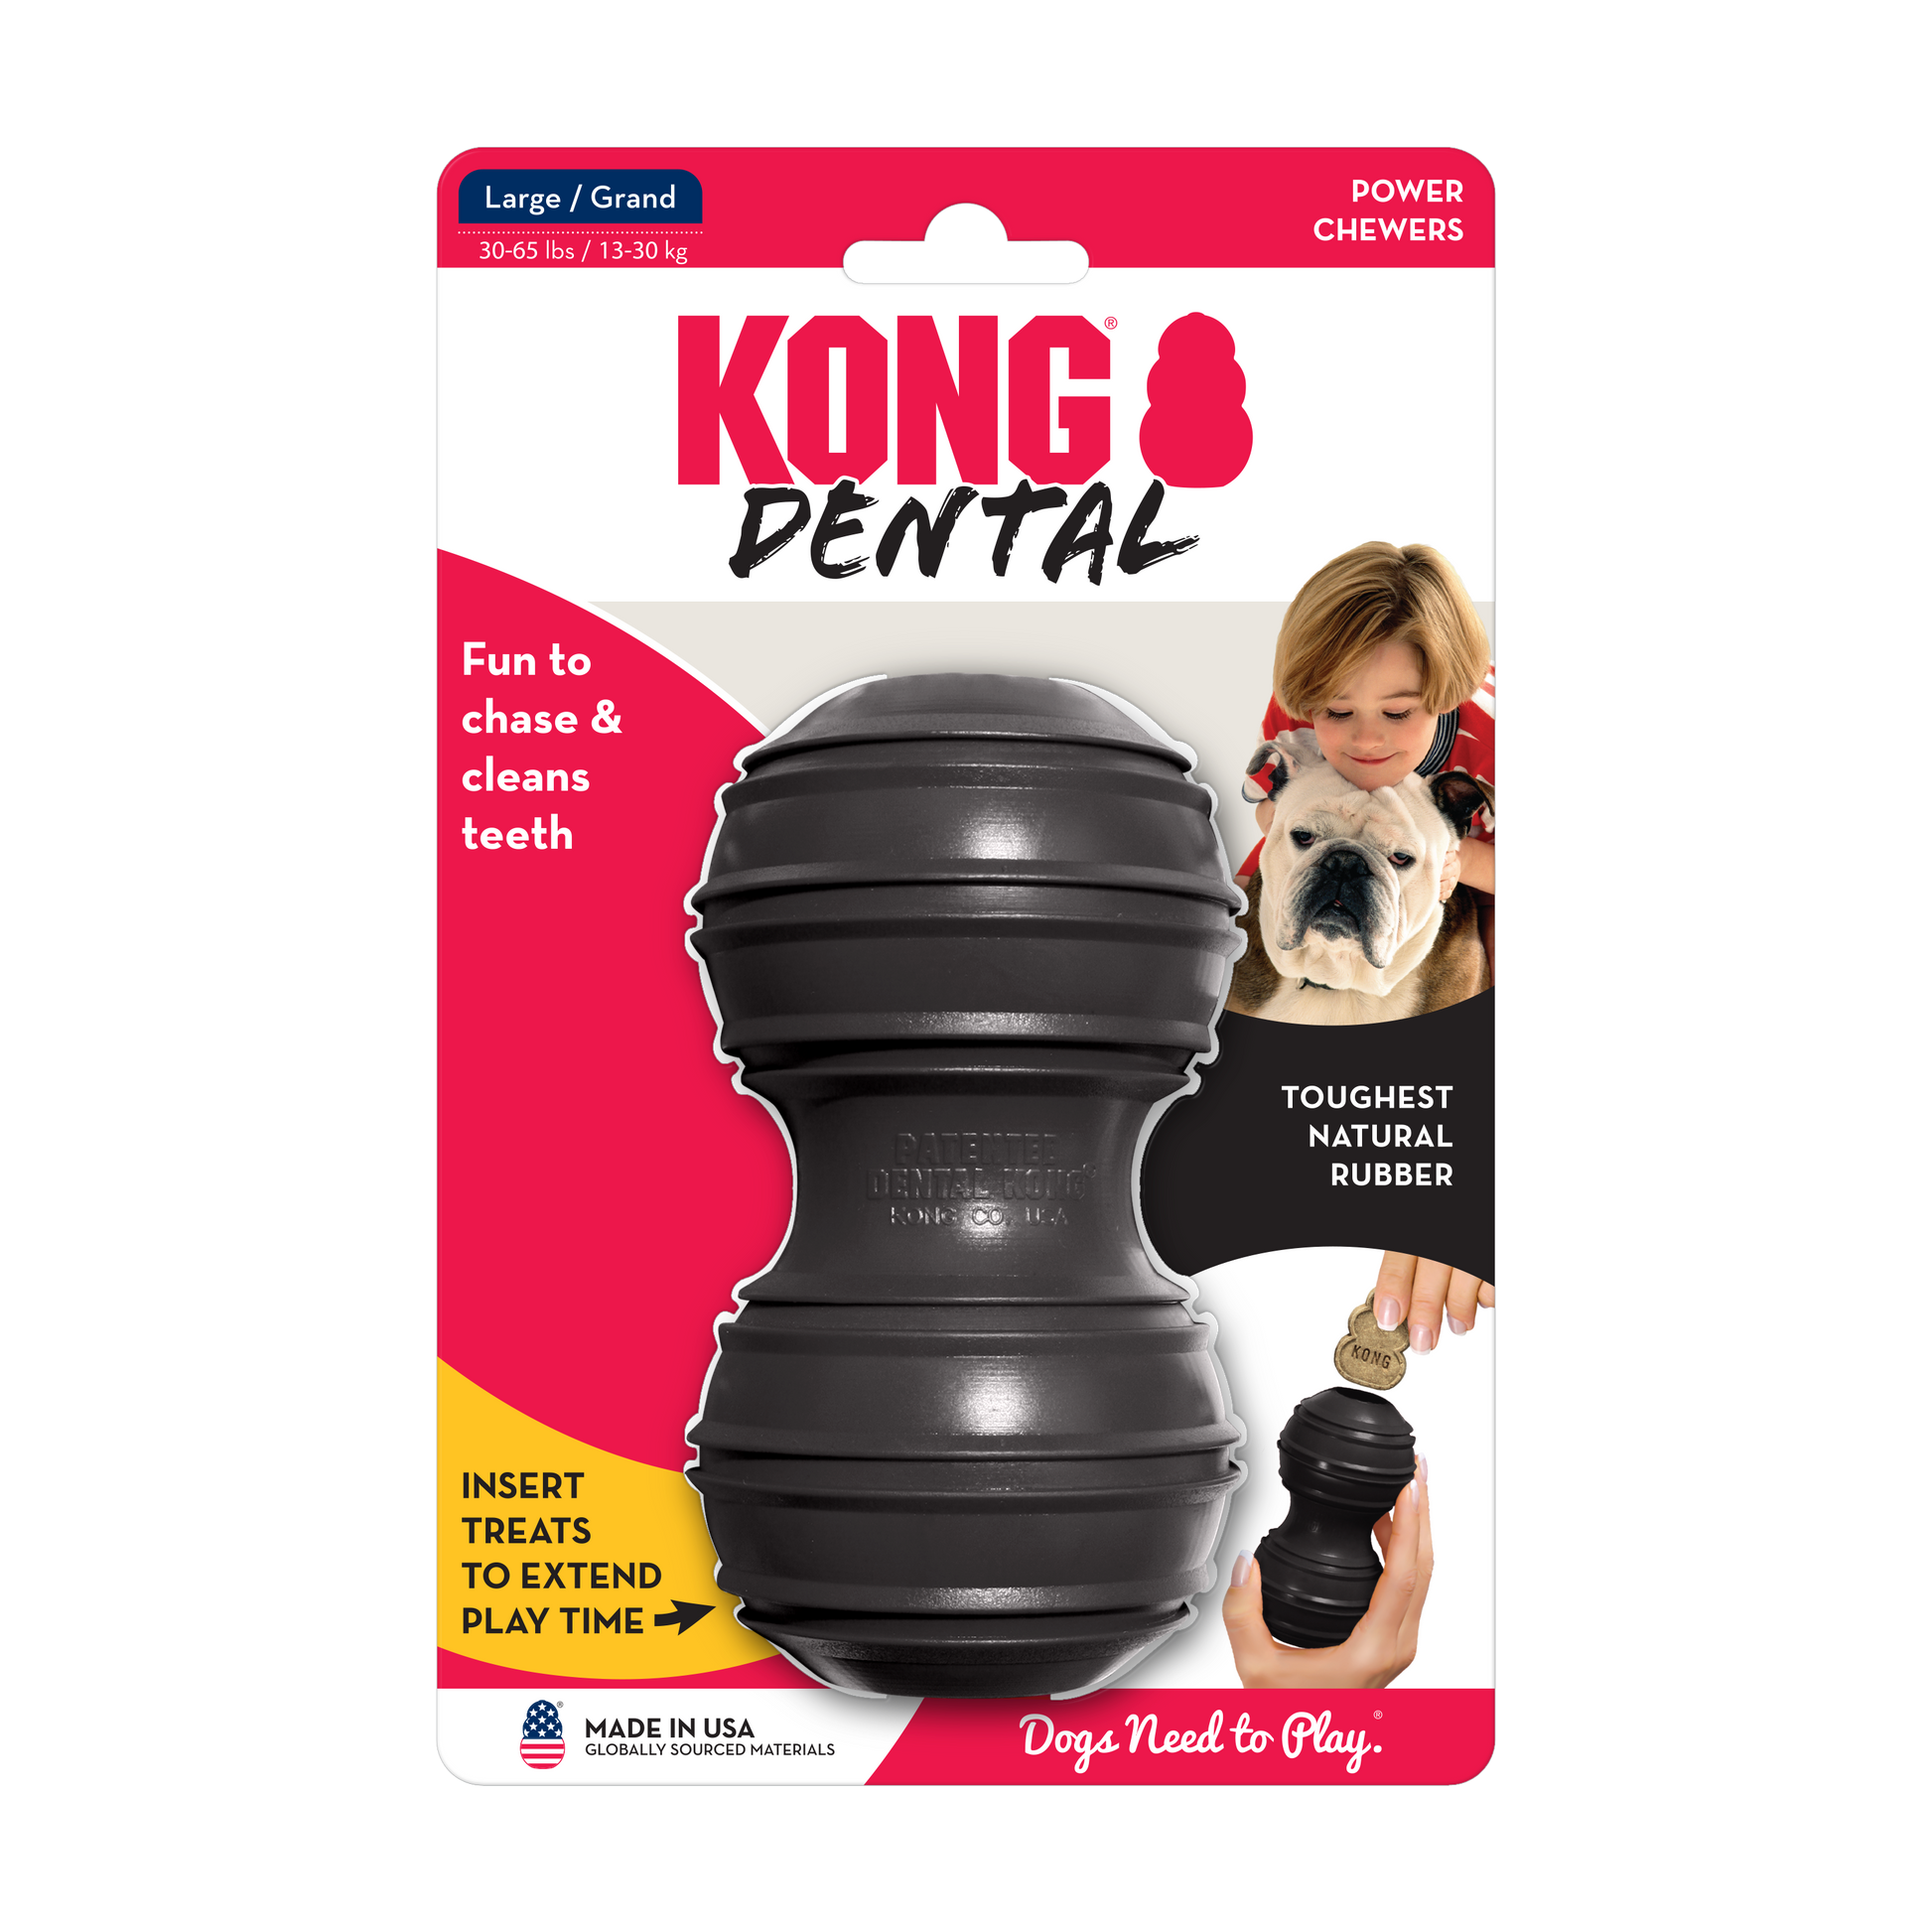 The SALE: KONG Dental Extreme toy from Your Whole Dog is a must-have for dogs who love chewing and need teeth cleaning.